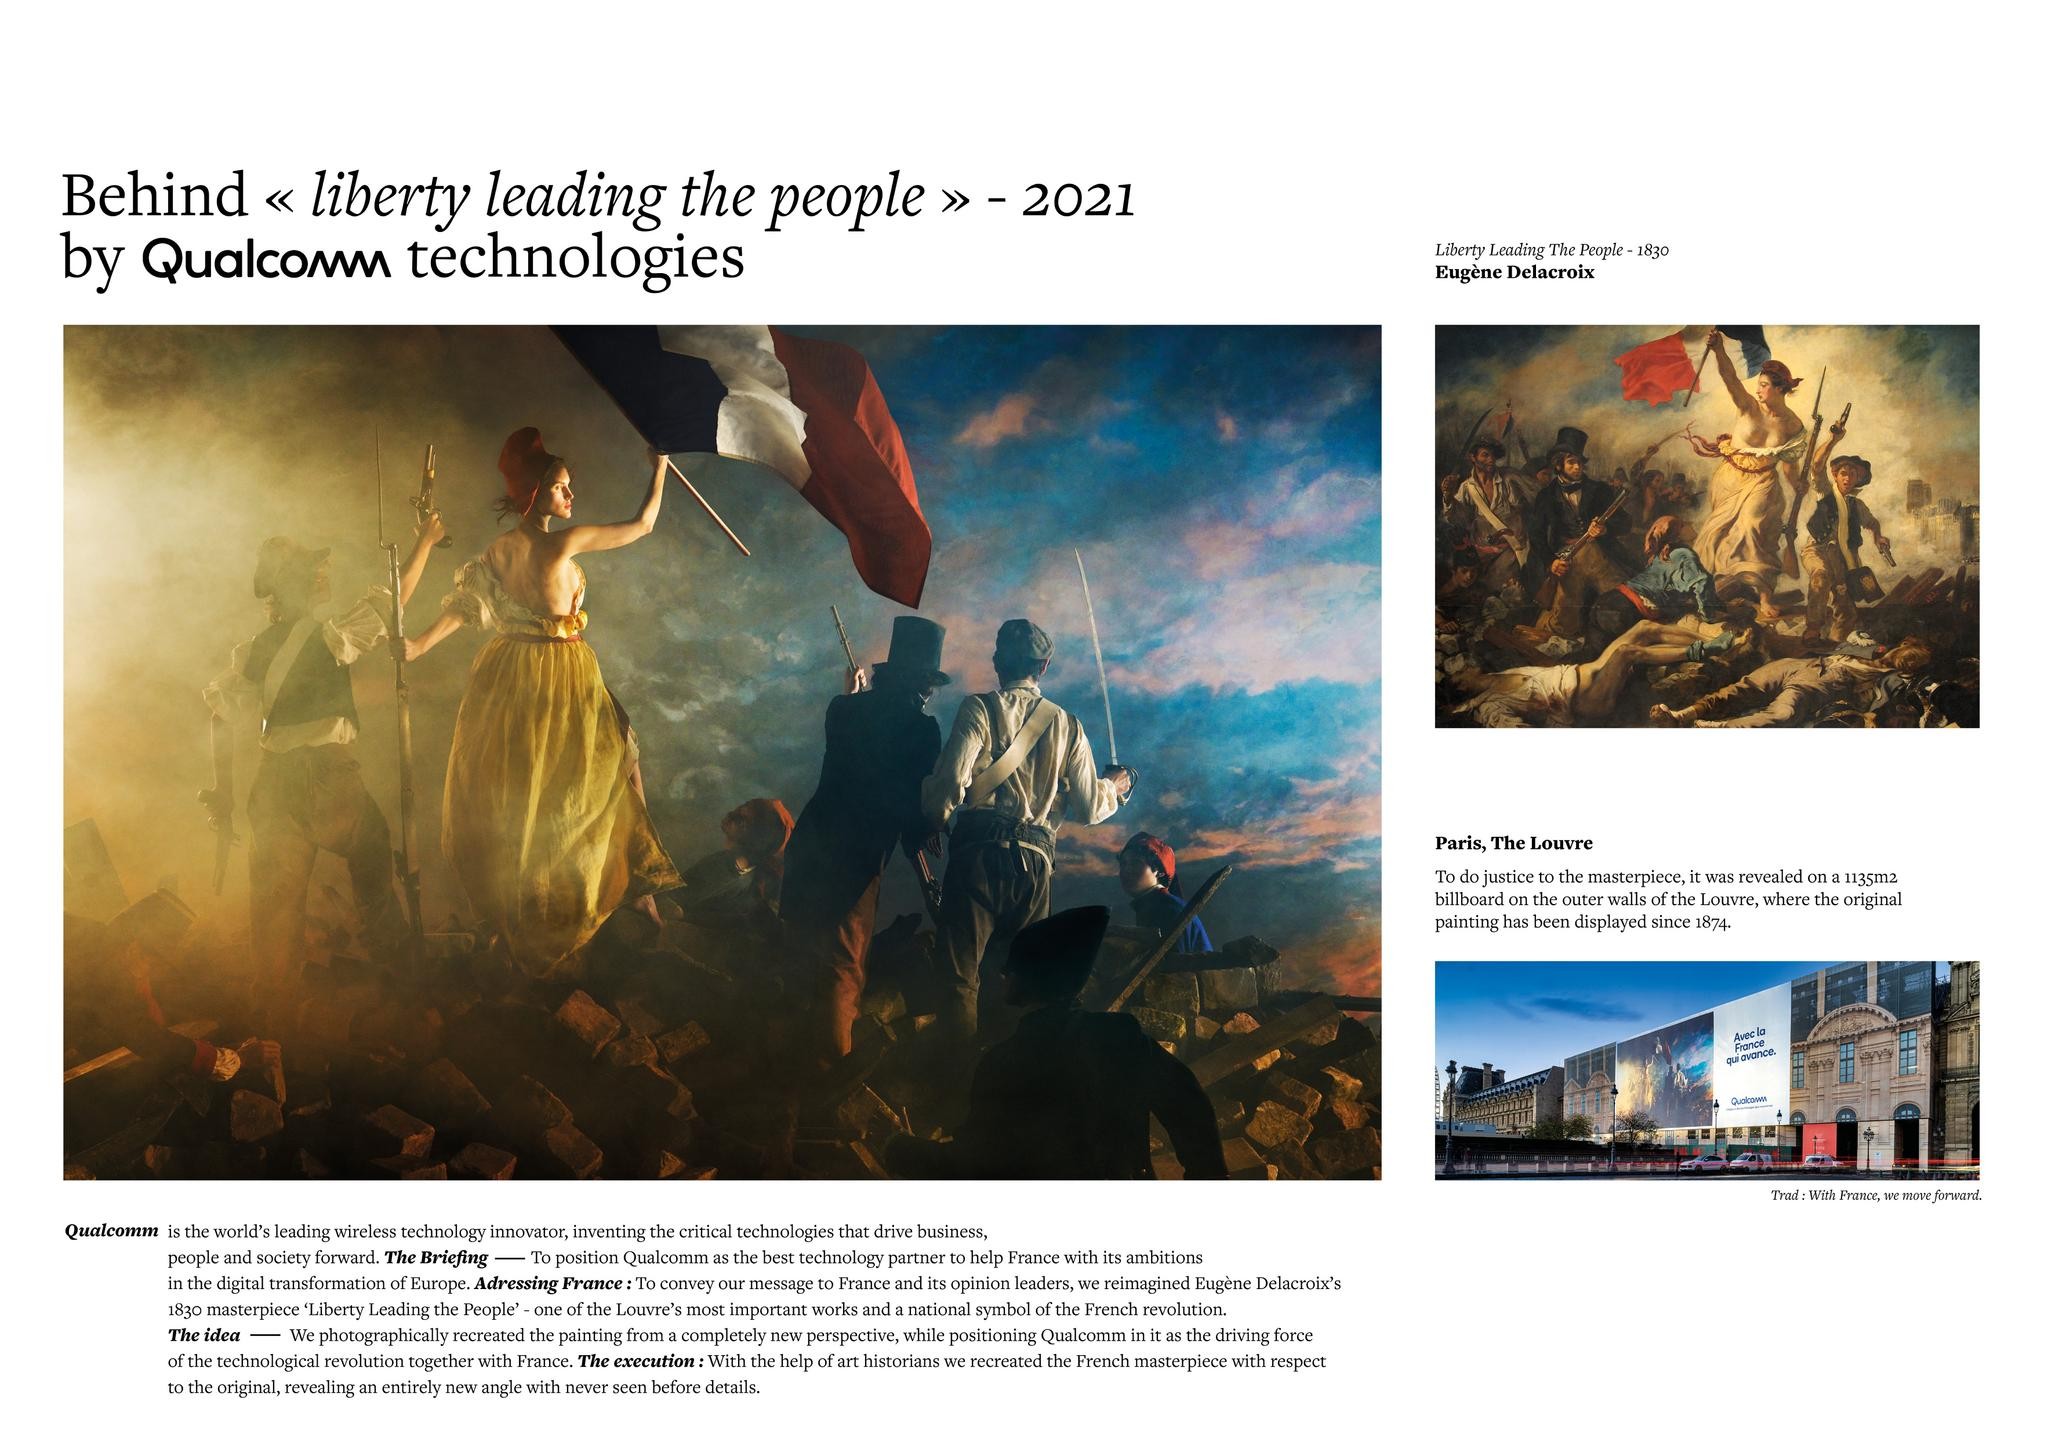 Behind 'Liberty Leading the People' by Qualcomm